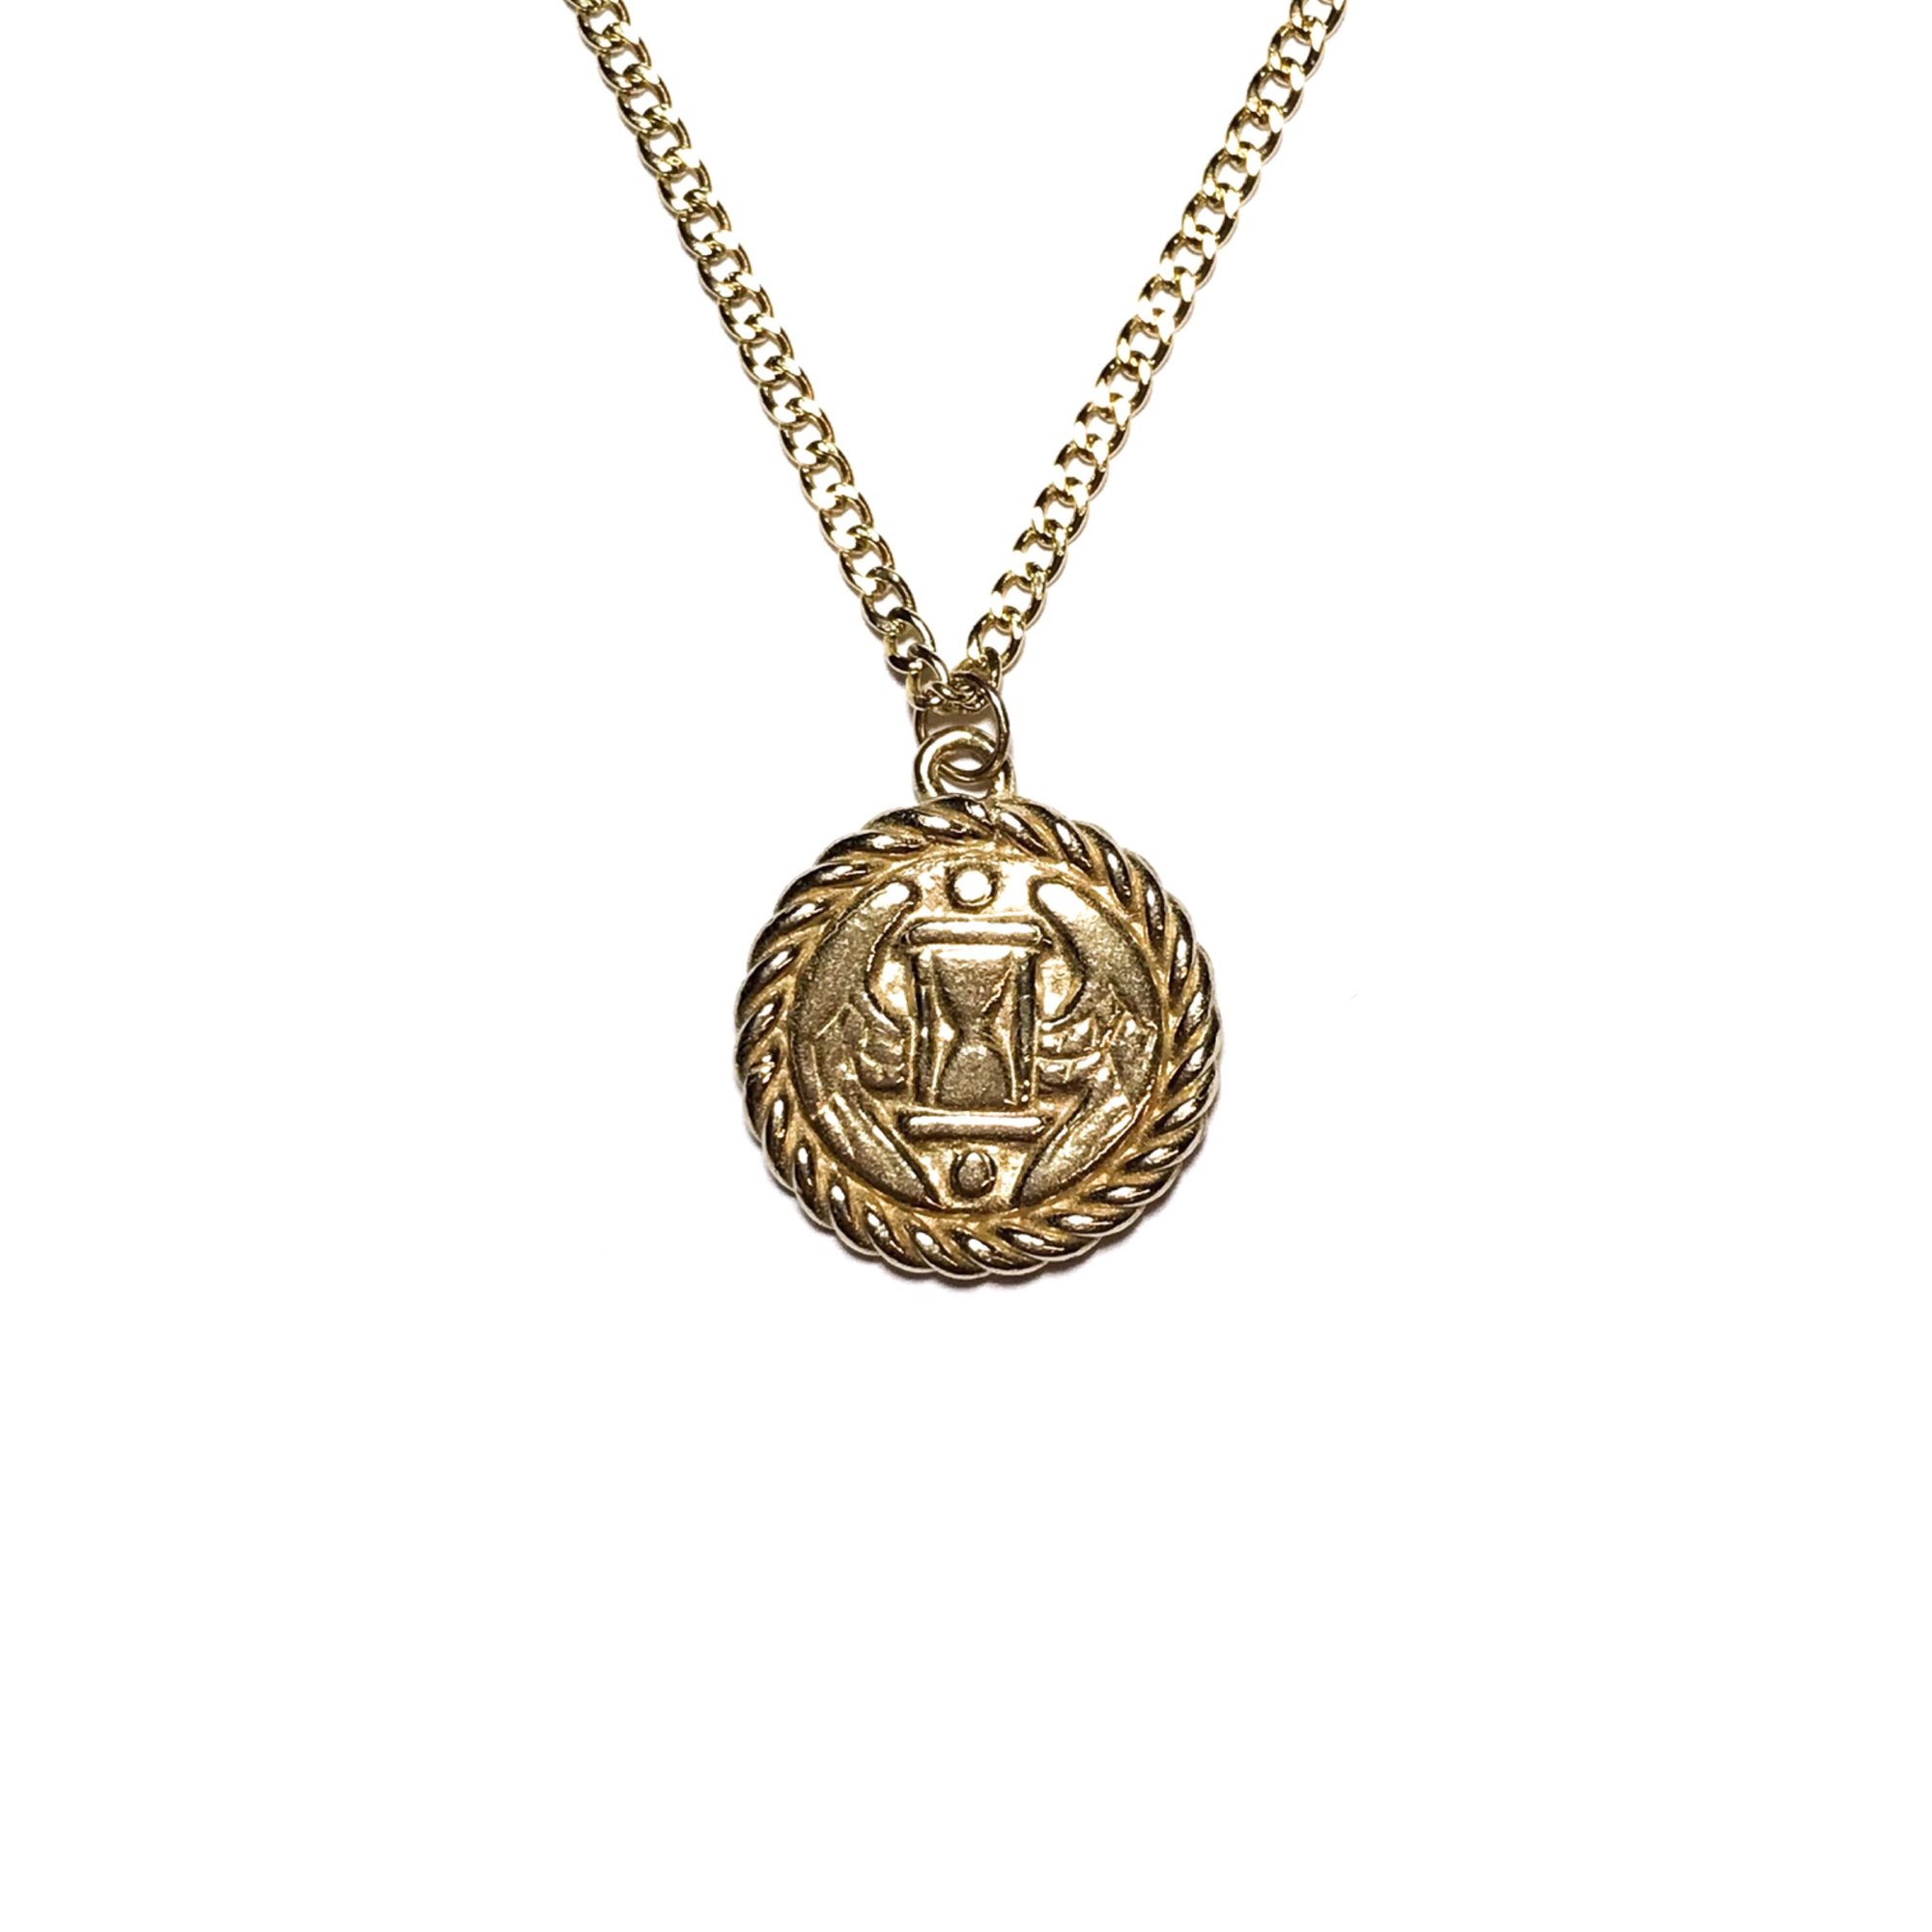 Tempus Fugit necklace in sterling silver or gold | Arcana Obscura